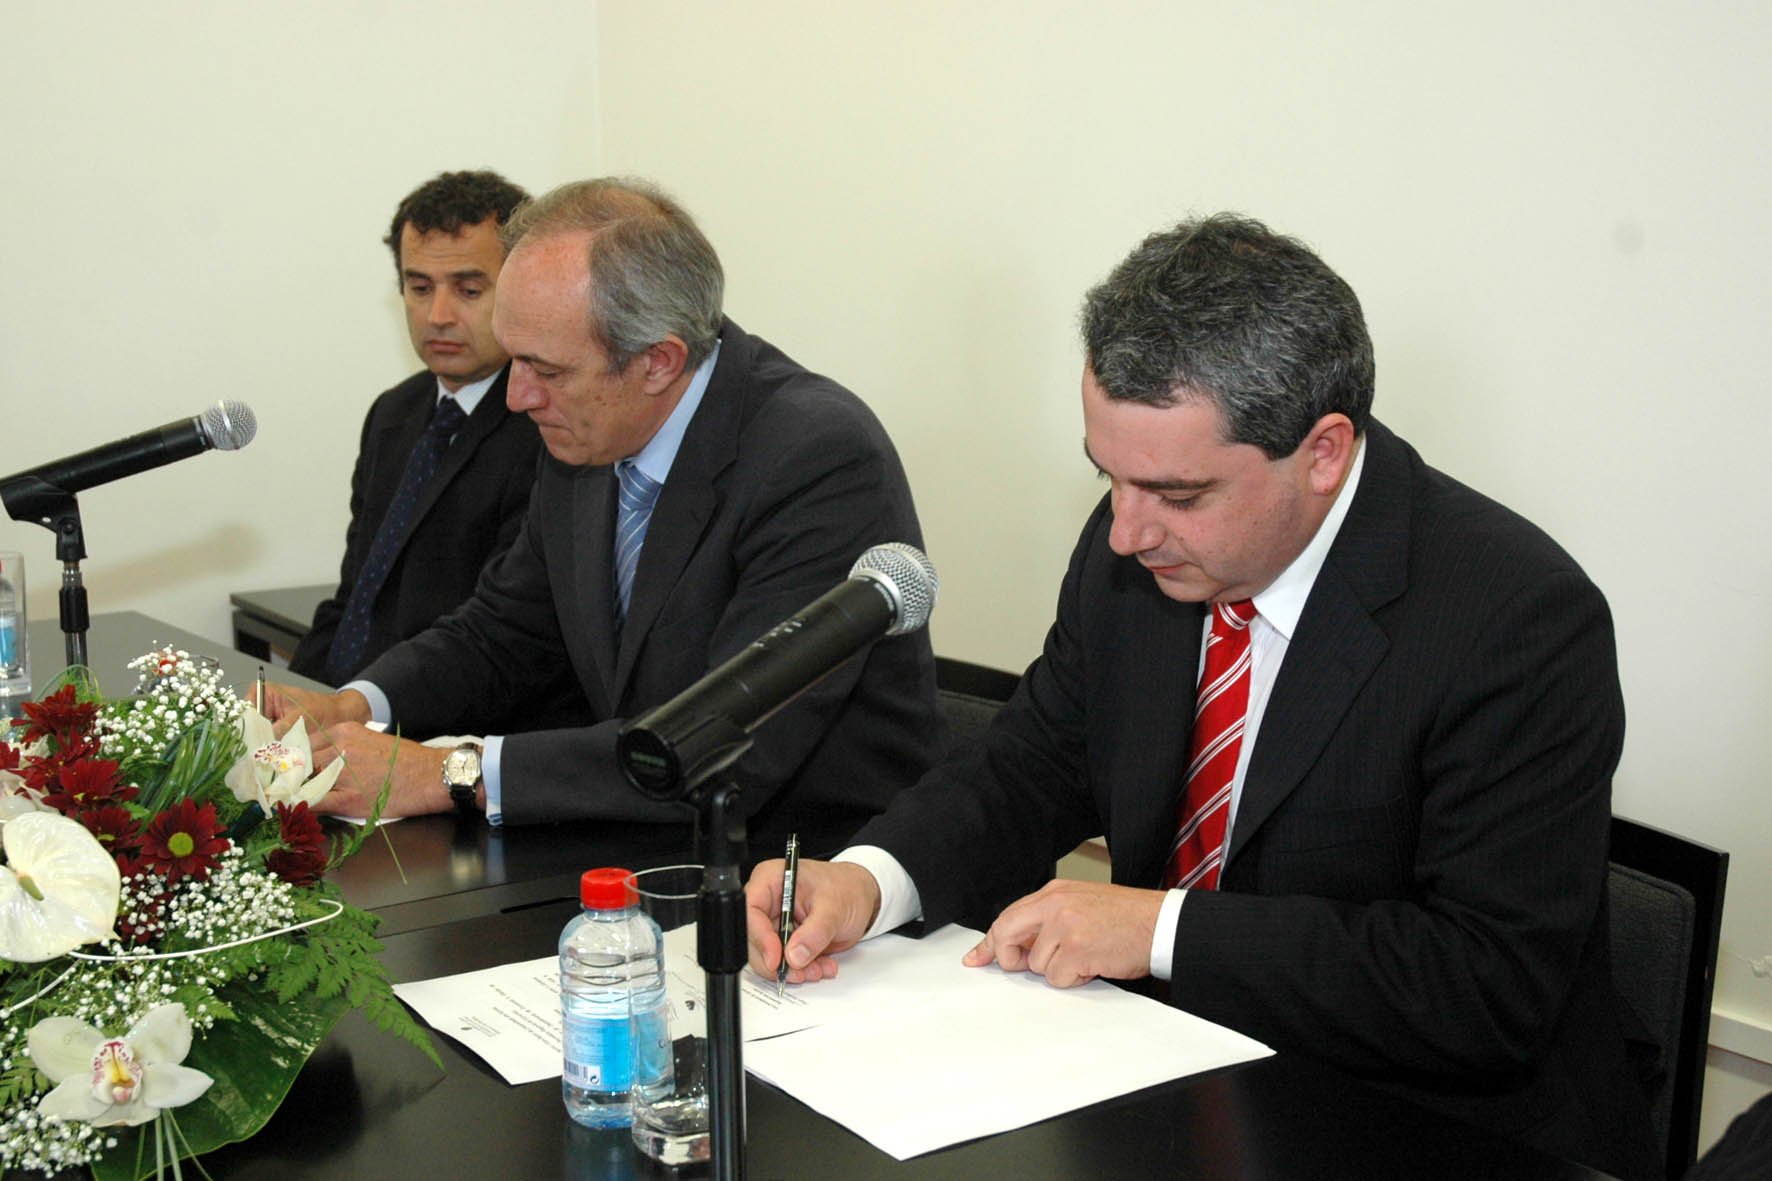 Vice-President of the Government signing the contract with the University